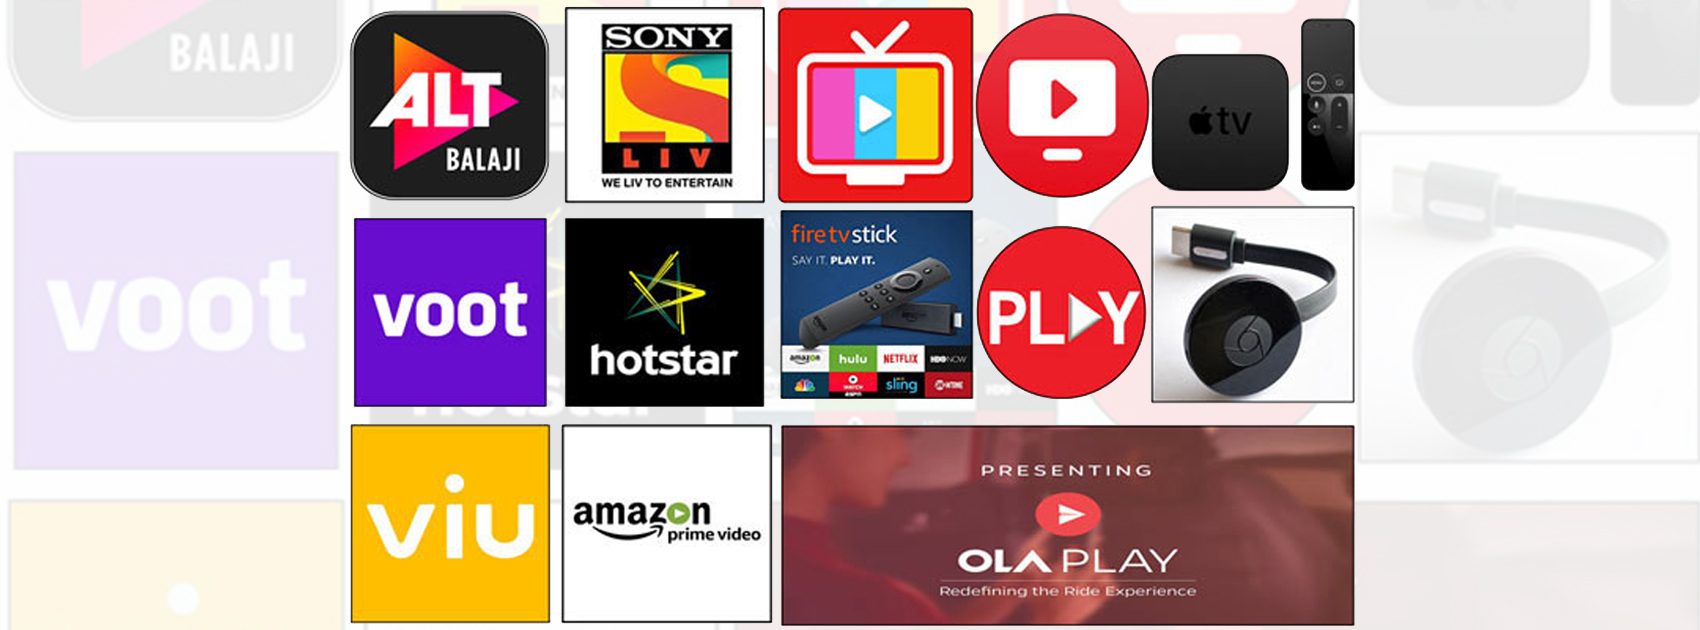 Rise Of OTT Platforms In India,Startup Stories,Over the Top Platforms,OTT Market In India,Online Video Market,OTT Platforms in India,Top OTT Platforms 2019 India,Indian OTT Industry,India Most Popular OTT Platforms,Best OTT Platforms in India